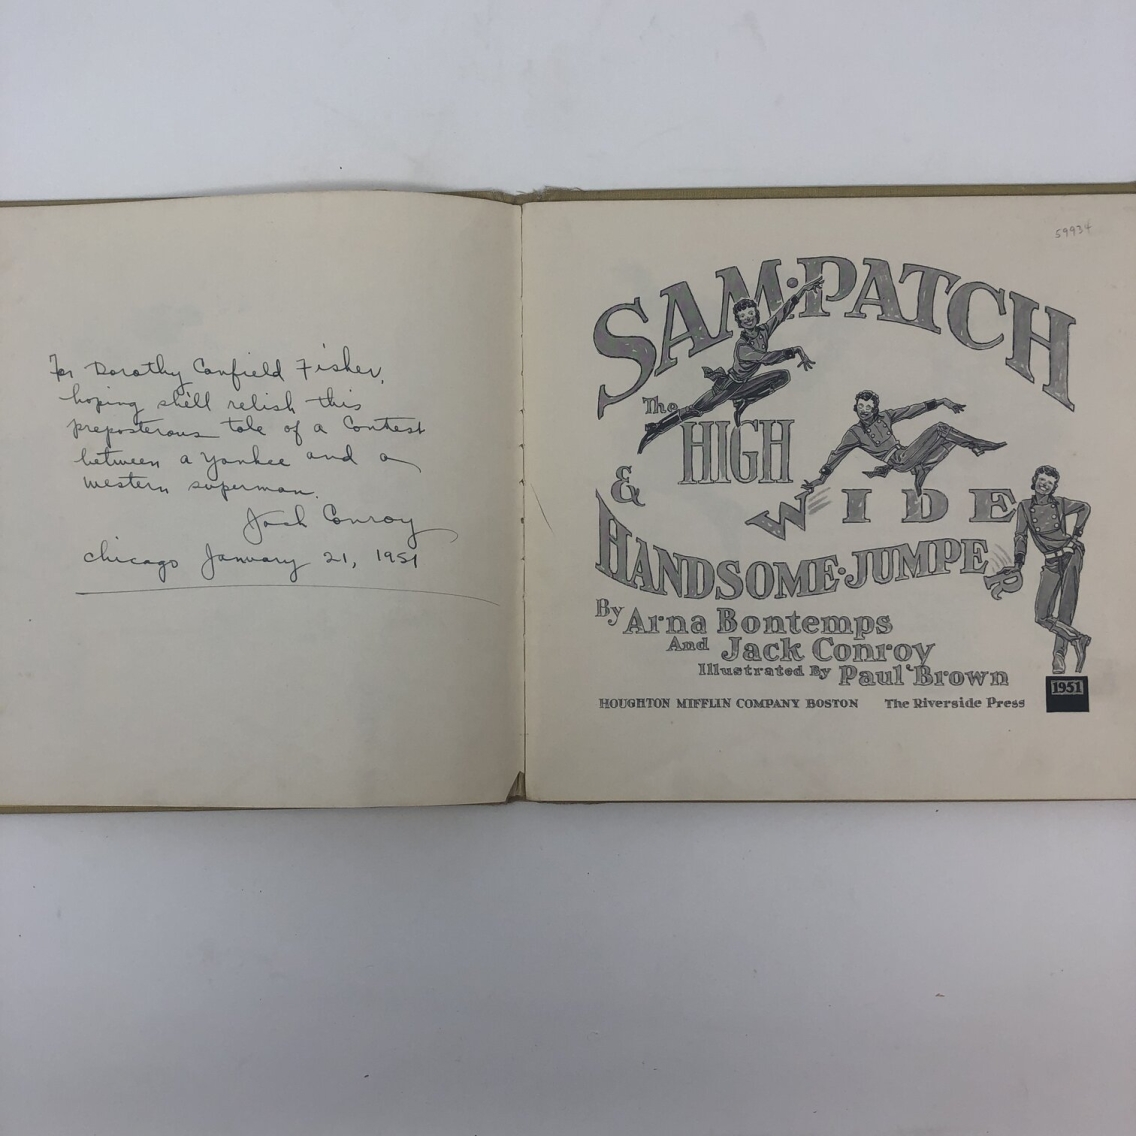 Photograph of the title page of Sam Patch by Arna Bontemps. The title page features illustrations of two high-jumping figures and one figure standing on a platform reading "1951." On the opposite page is a handwritten note that reads: "For Dorothy Canfield Fisher, hoping she'll relish this preposterous tale of a contest between a yankee and a western superman. Jack Conroy, Chicago January 21, 1951."